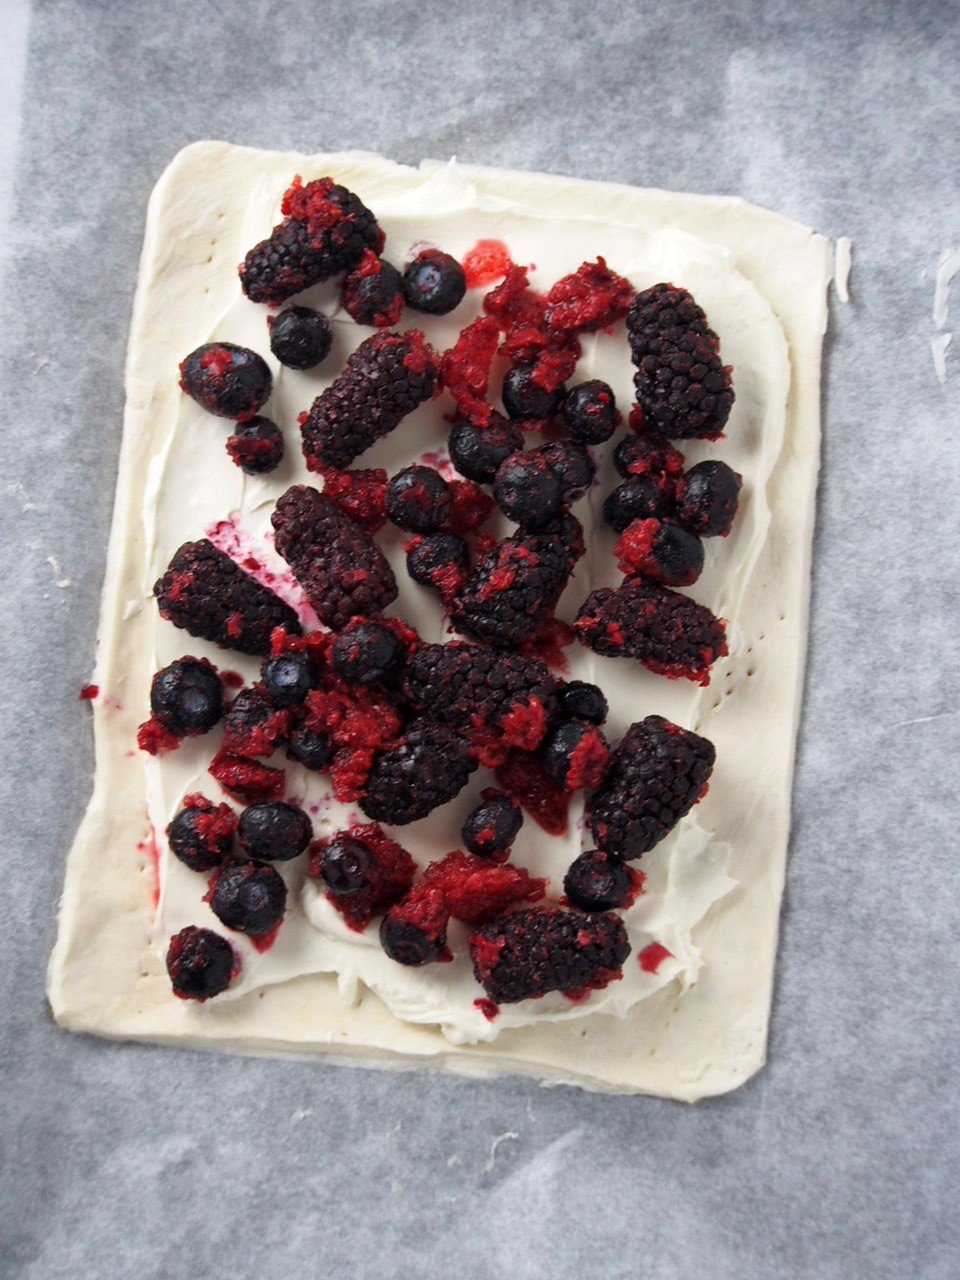 Cream cheese mixture spread all over the puff pastry, leaving a border, then the berries are arranged on top.